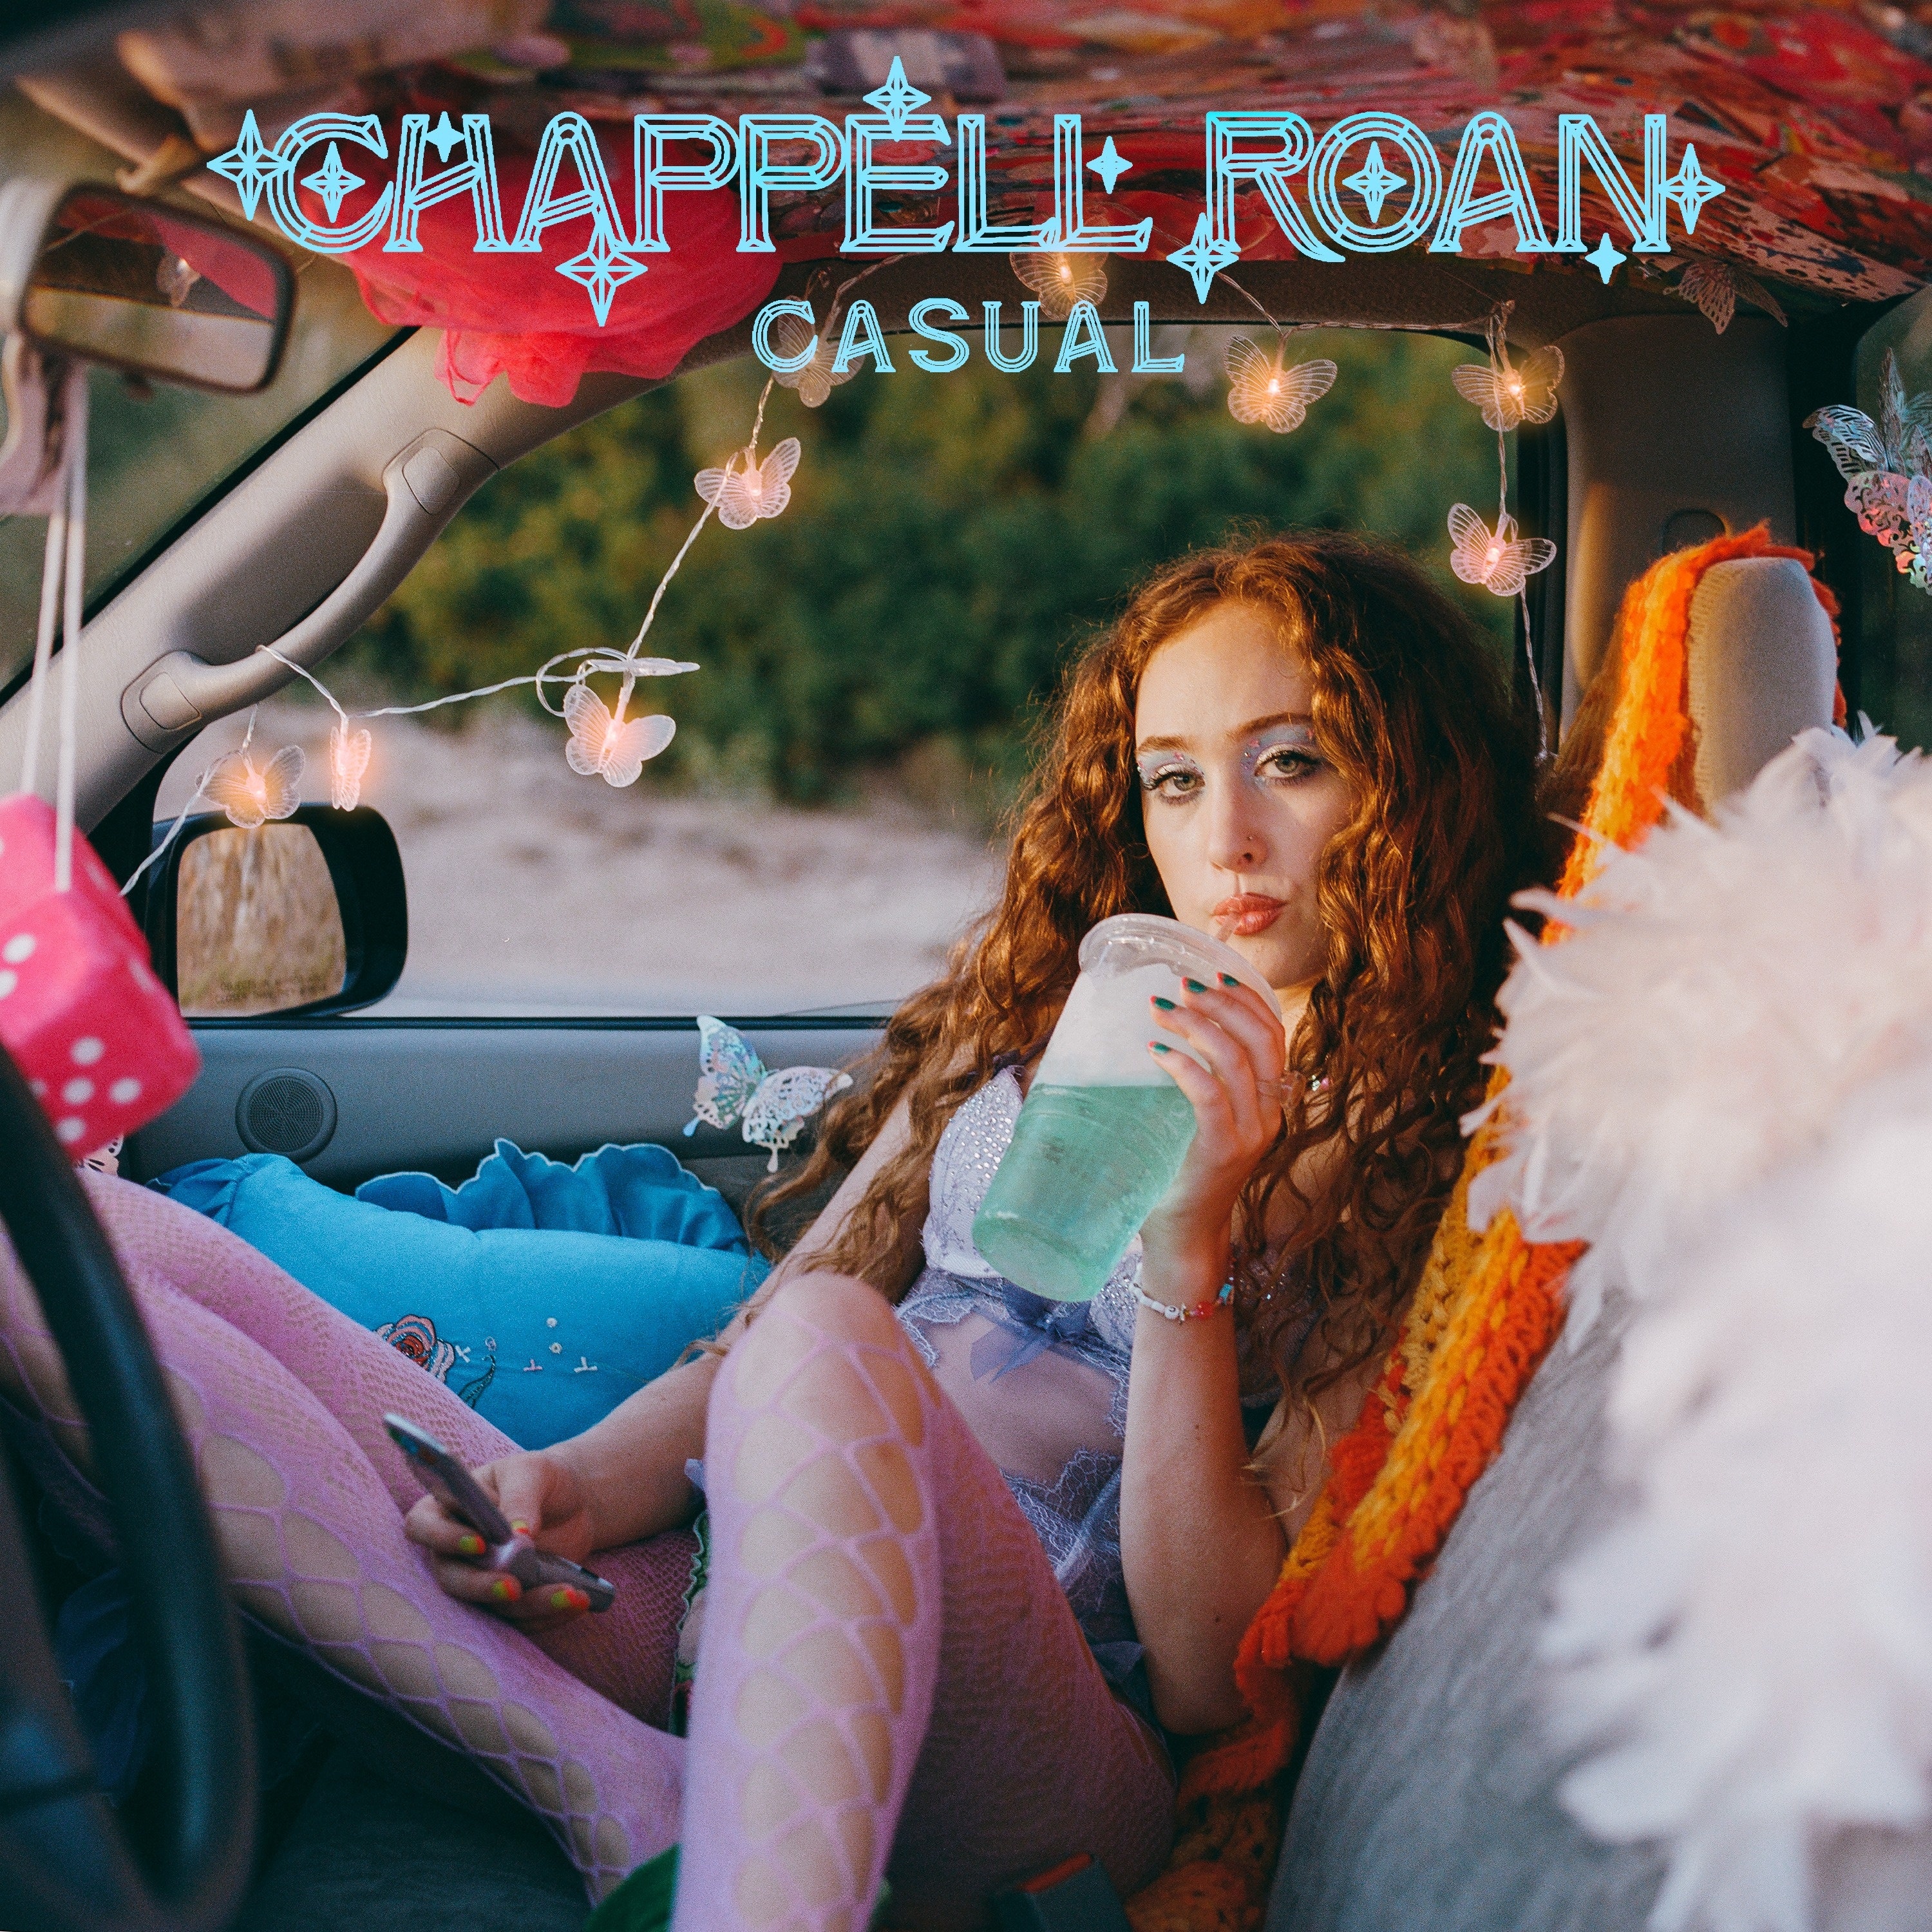 Chappell Roan Casual cover artwork